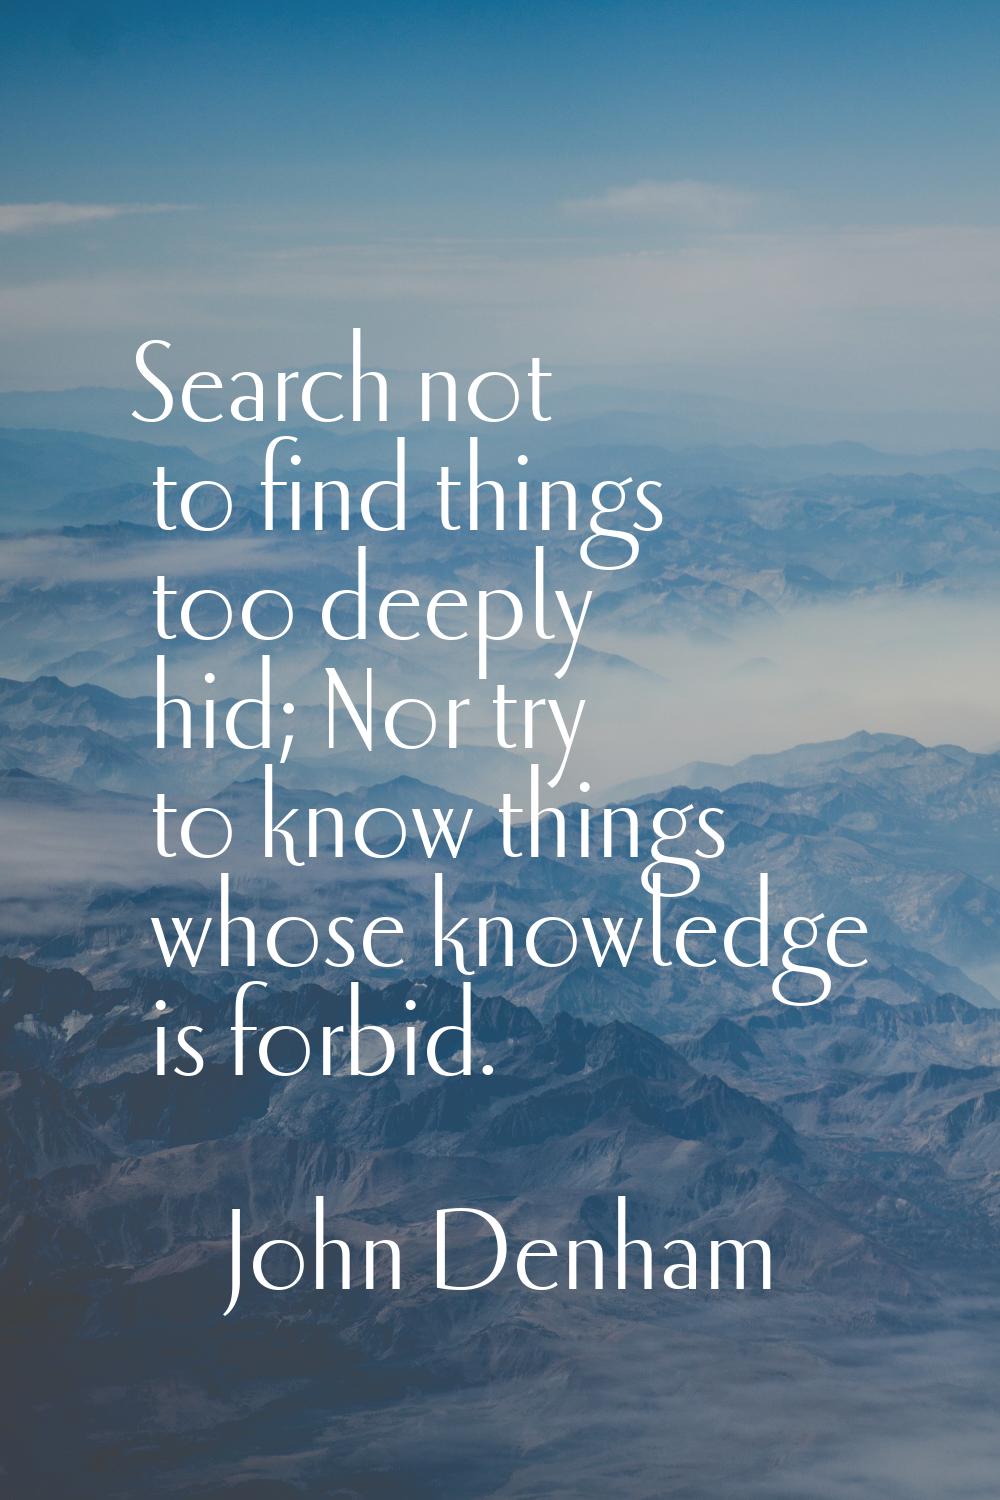 Search not to find things too deeply hid; Nor try to know things whose knowledge is forbid.